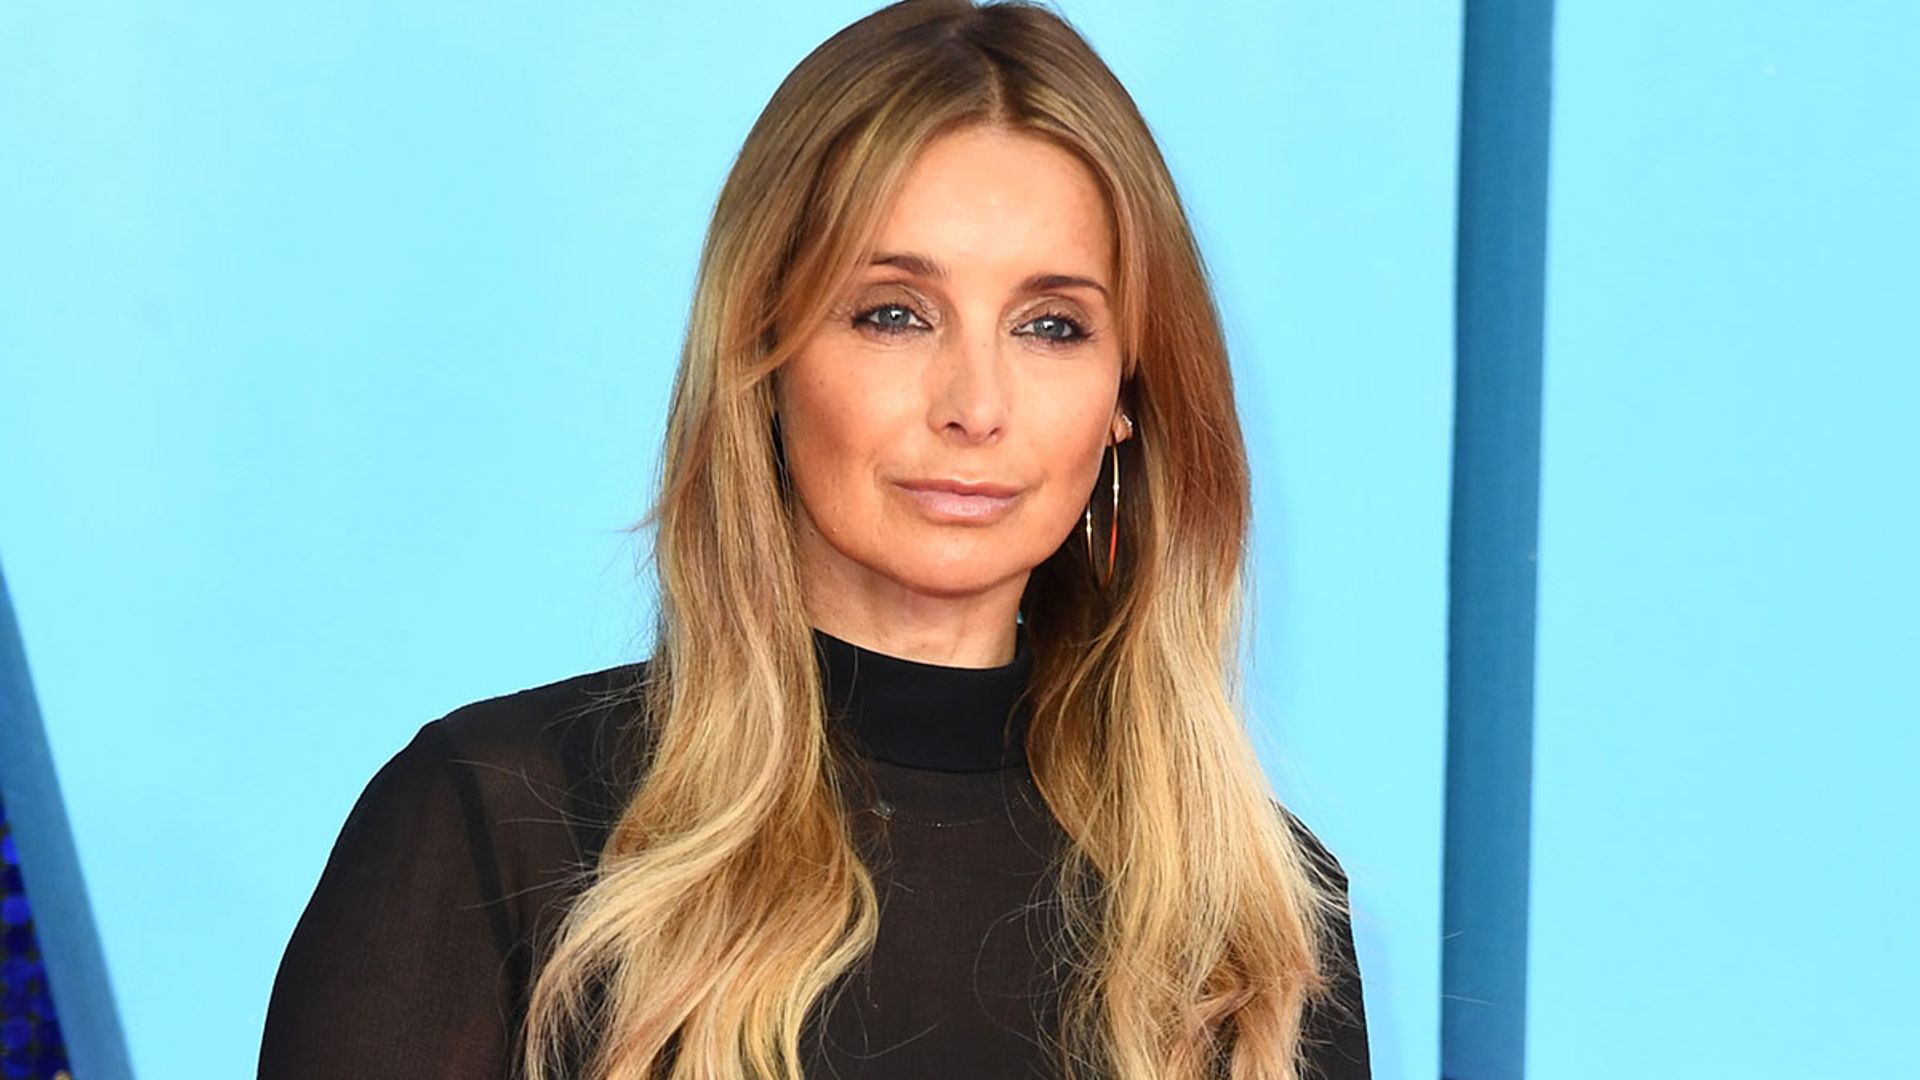 Louise Redknapp reveals how Strictly affected 'family time'